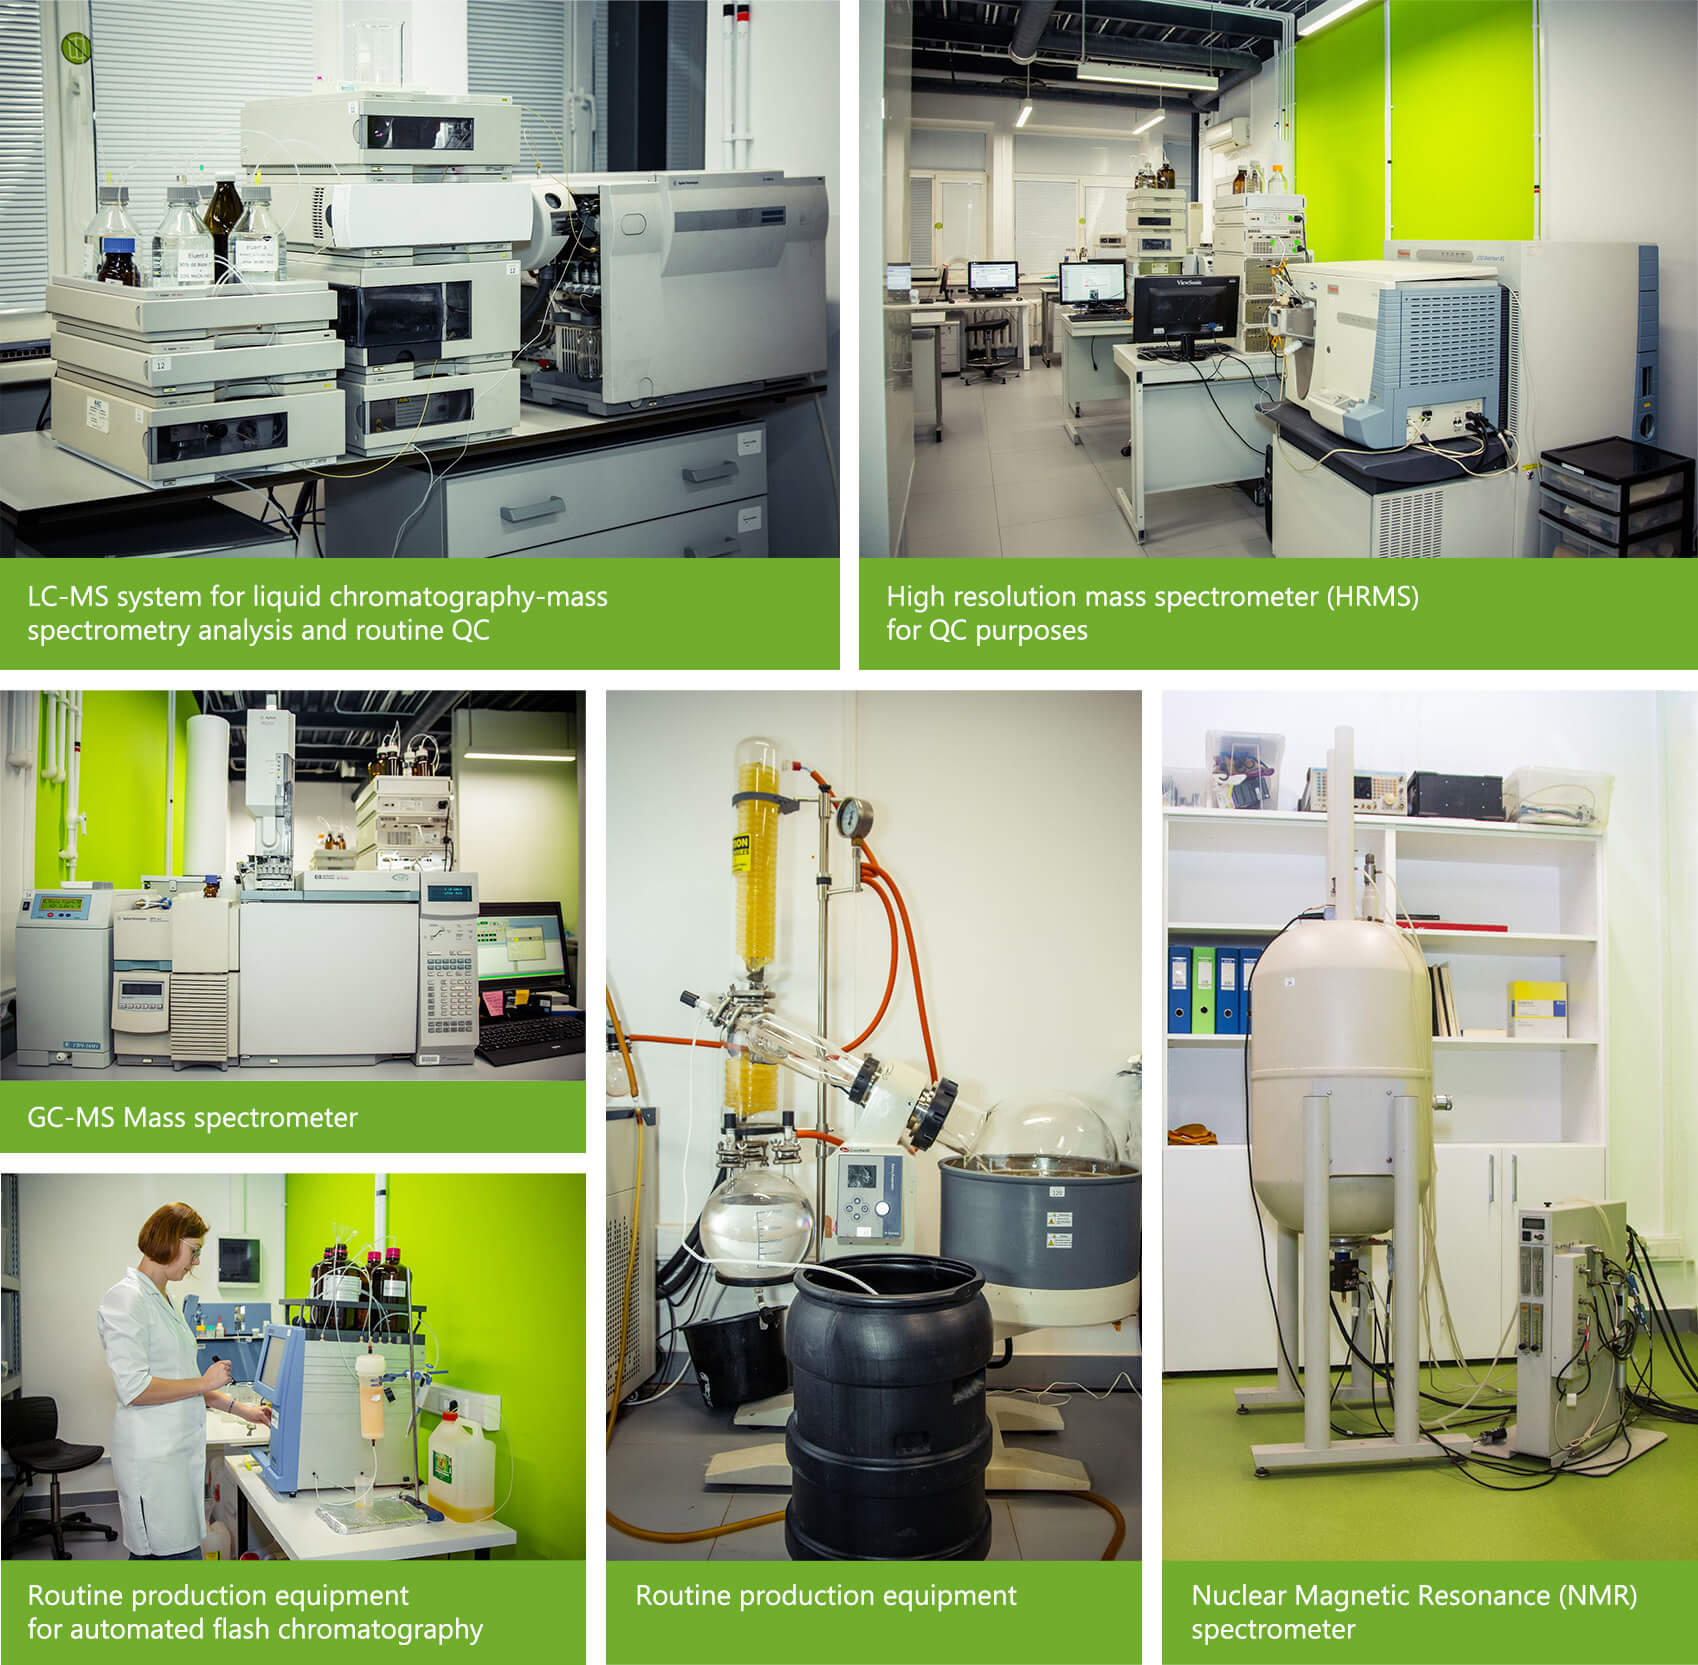 NMR spectrometer for routine QC, GC-MS equipment for routine QC, LC-MS system for routine QC at Lumiprobe, Chromatograph for R&D needs, Column chromatography system for purification